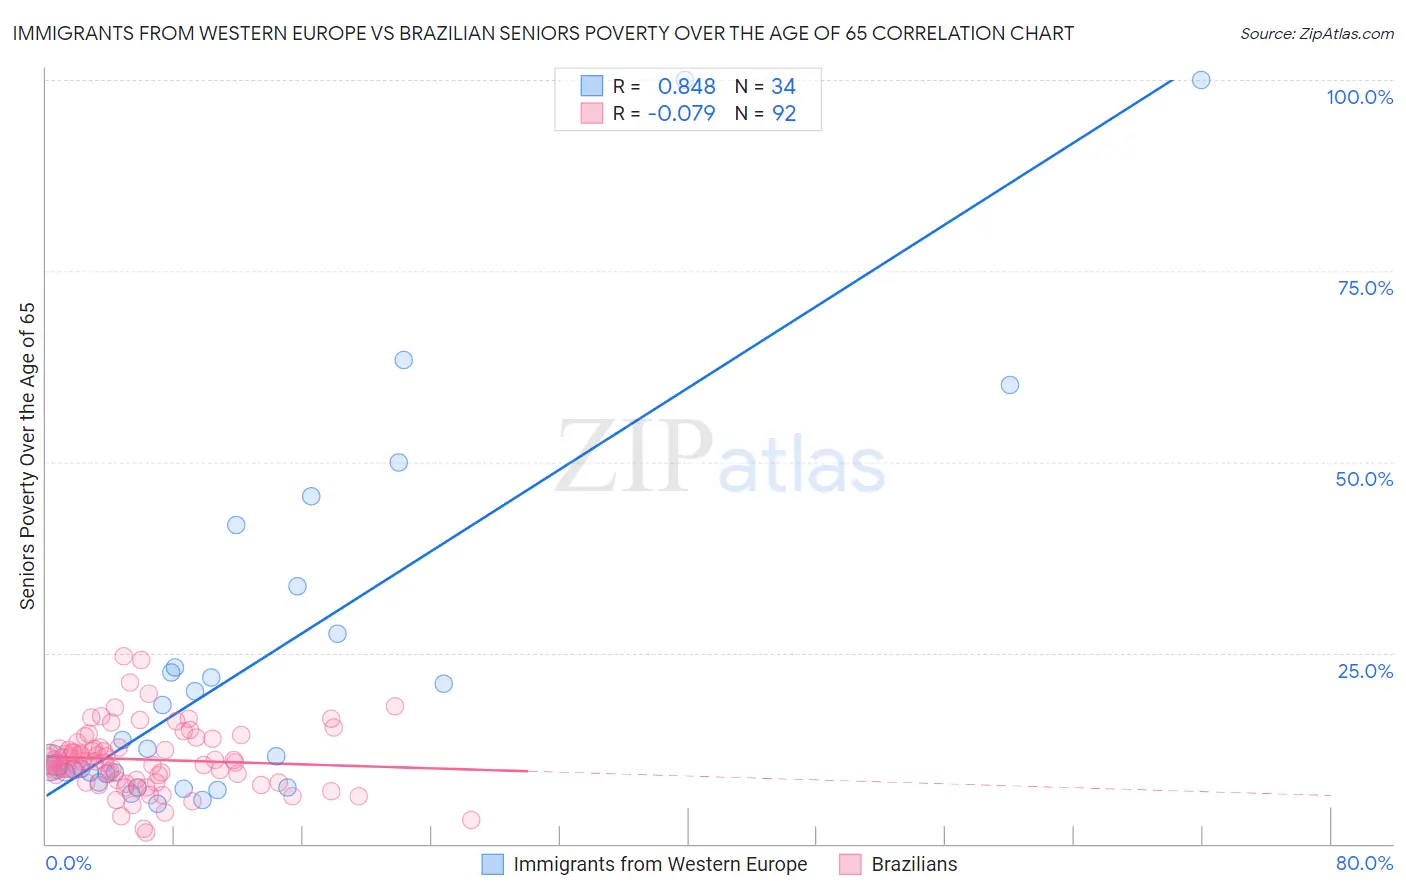 Immigrants from Western Europe vs Brazilian Seniors Poverty Over the Age of 65